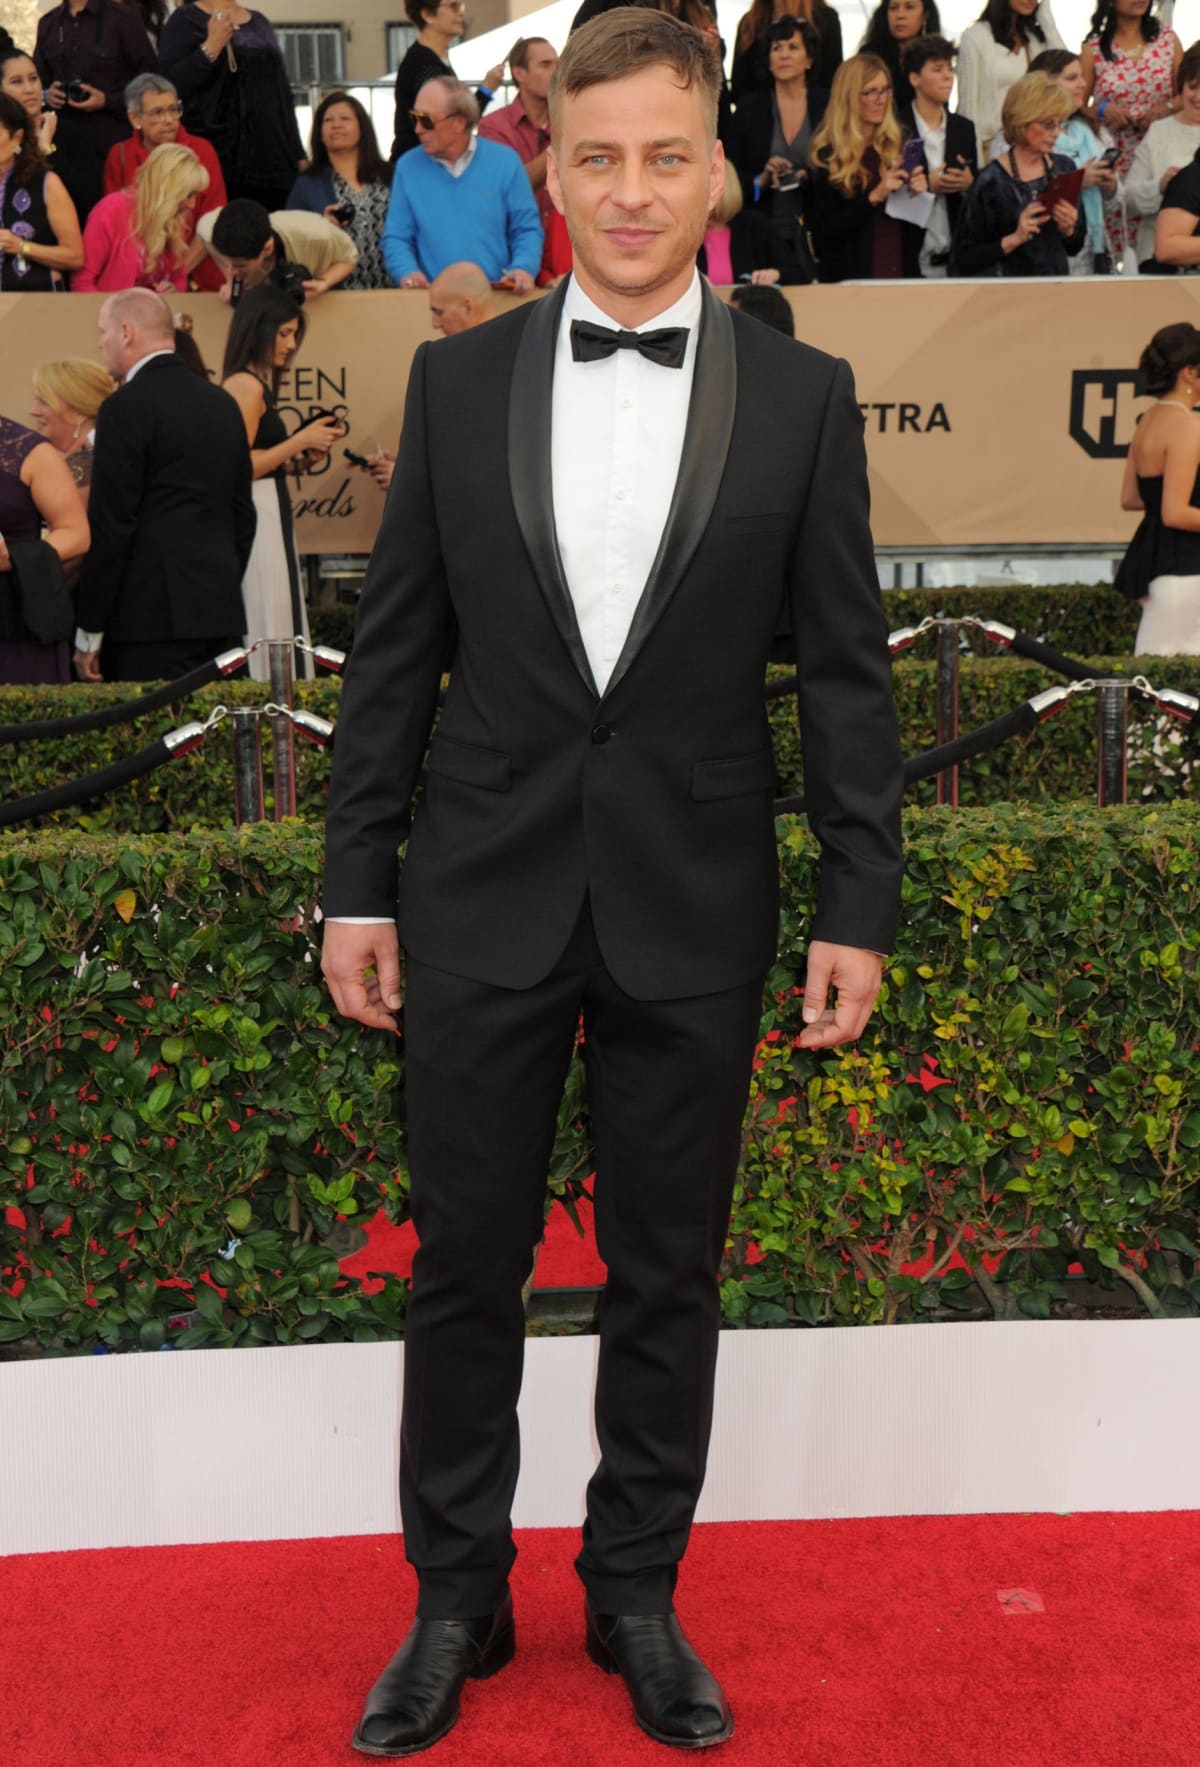 Looking dapper in a suit, Tom Wlaschiha stepped out for the 22nd Annual Screen Actors Guild Awards